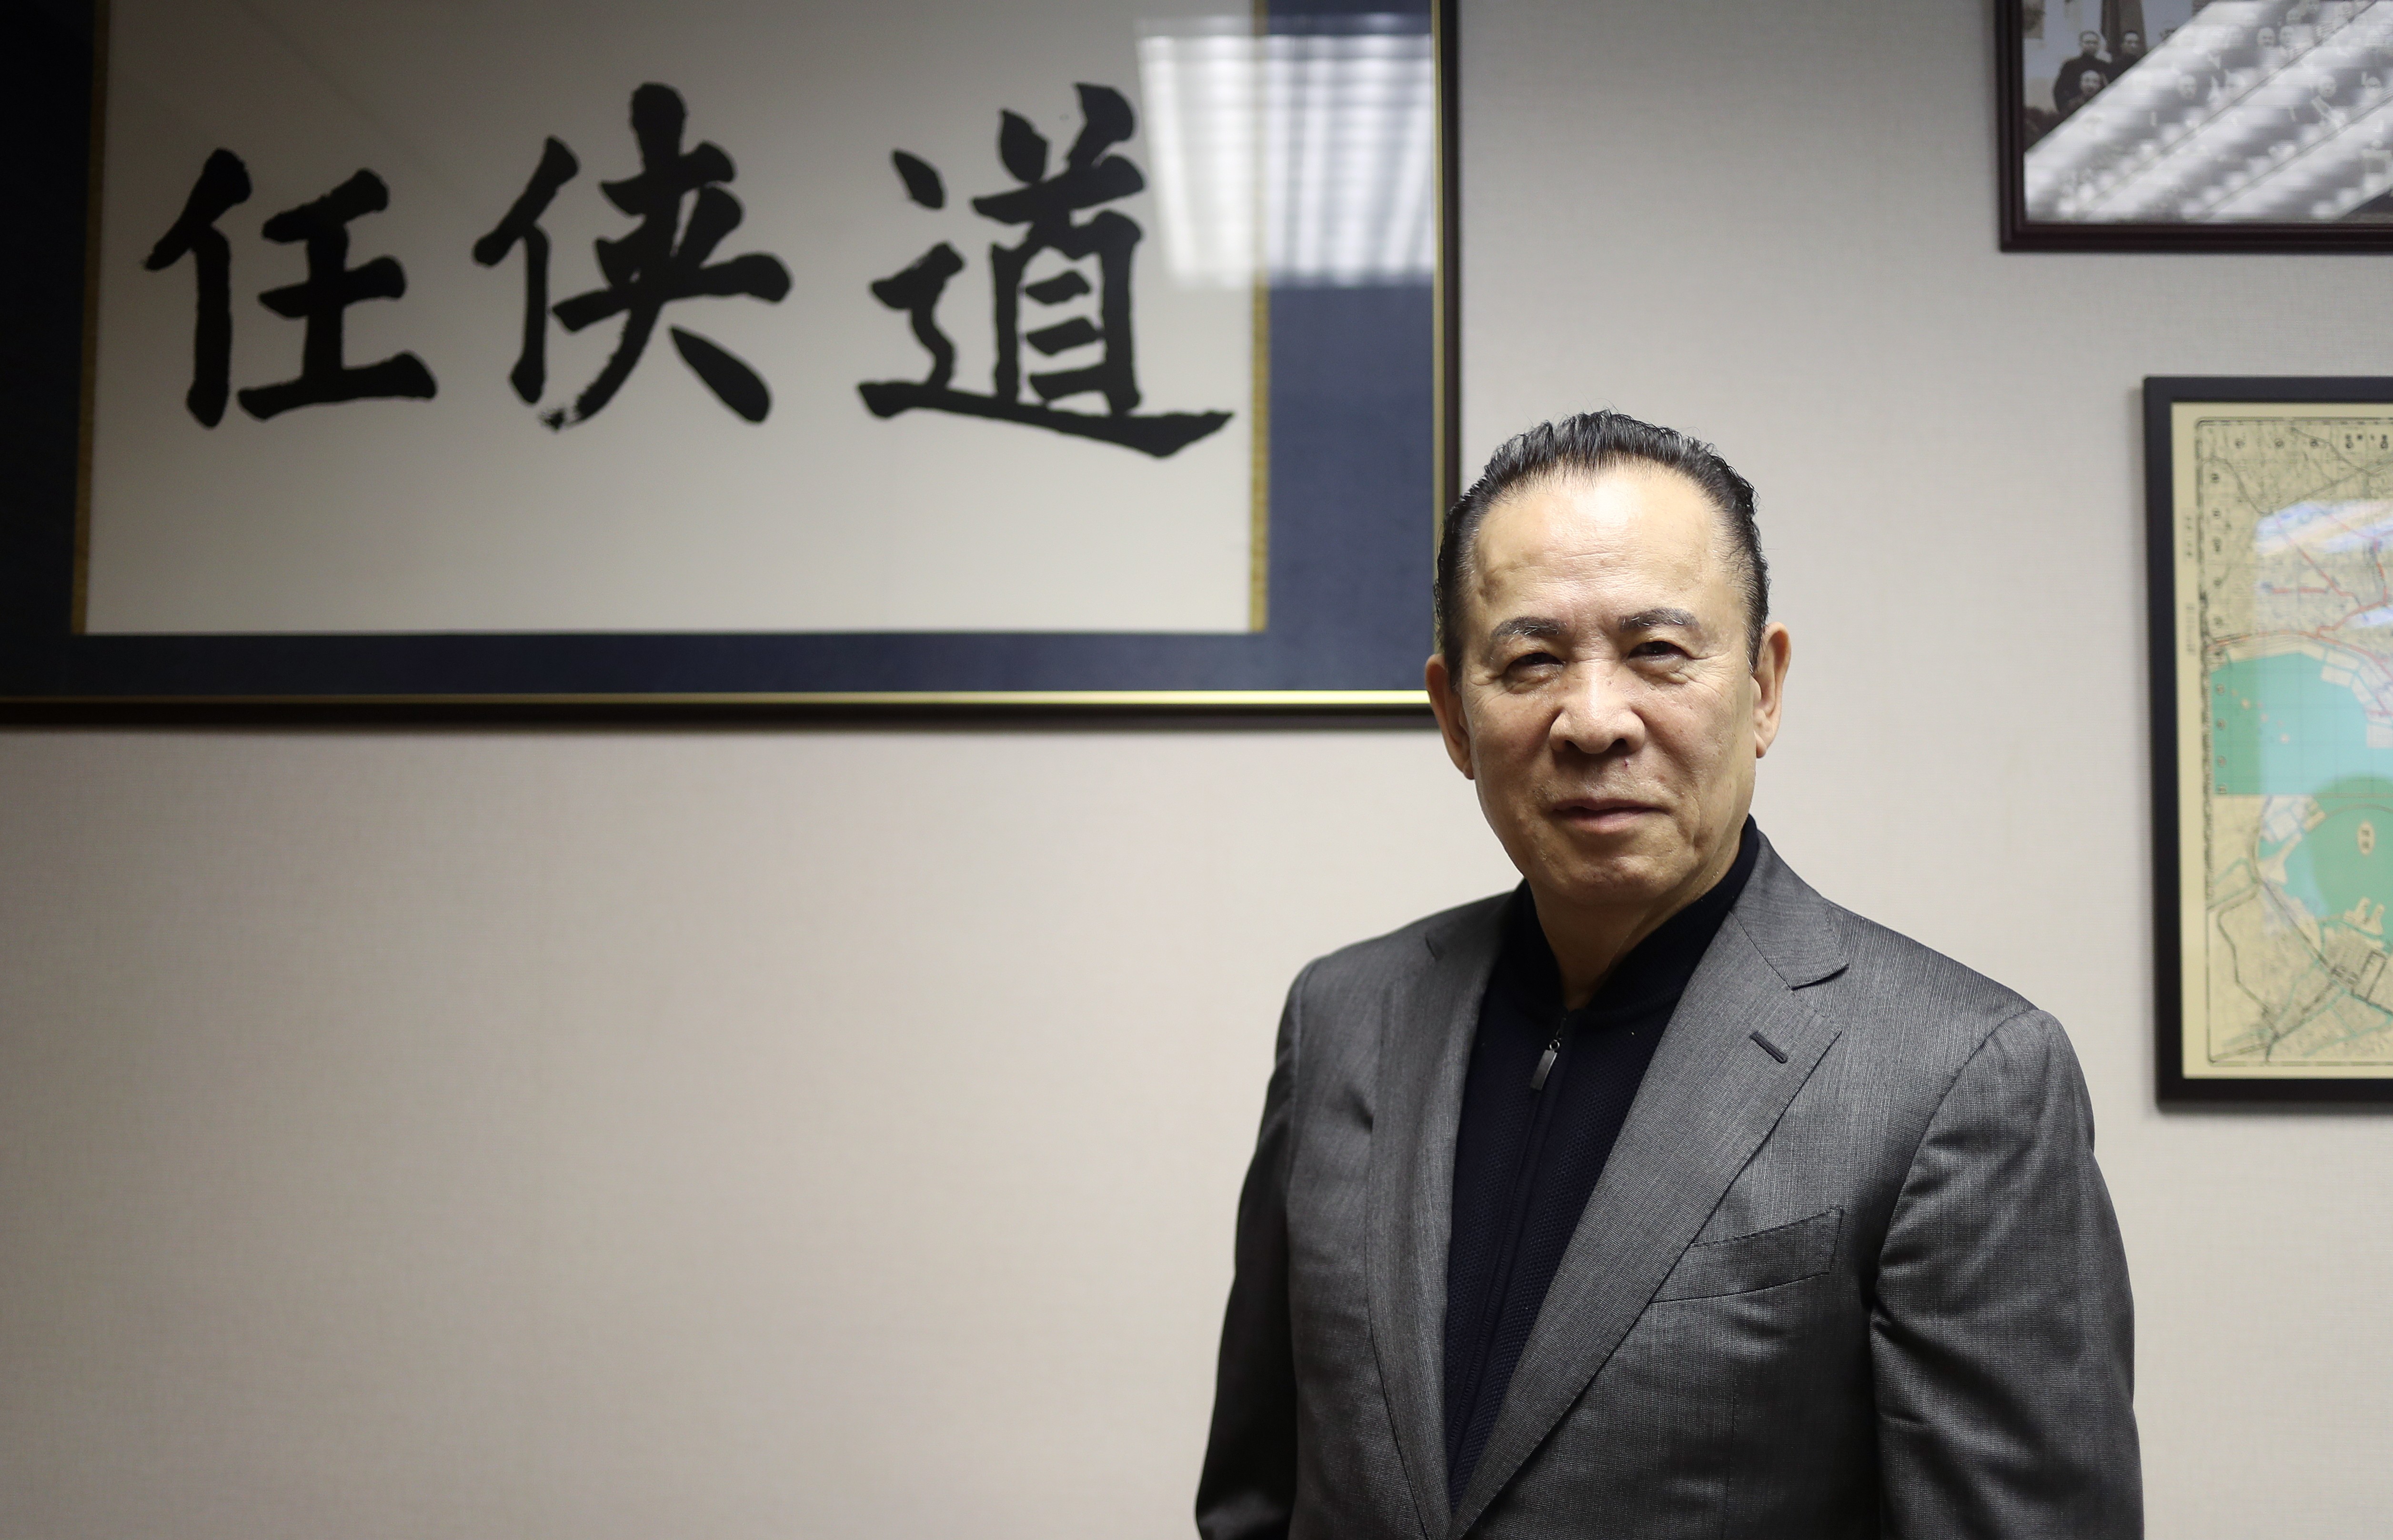 Kazuo Okada, former majority shareholder of Wynn Resorts, poses for a portrait in Central. Photo: Winson Wong